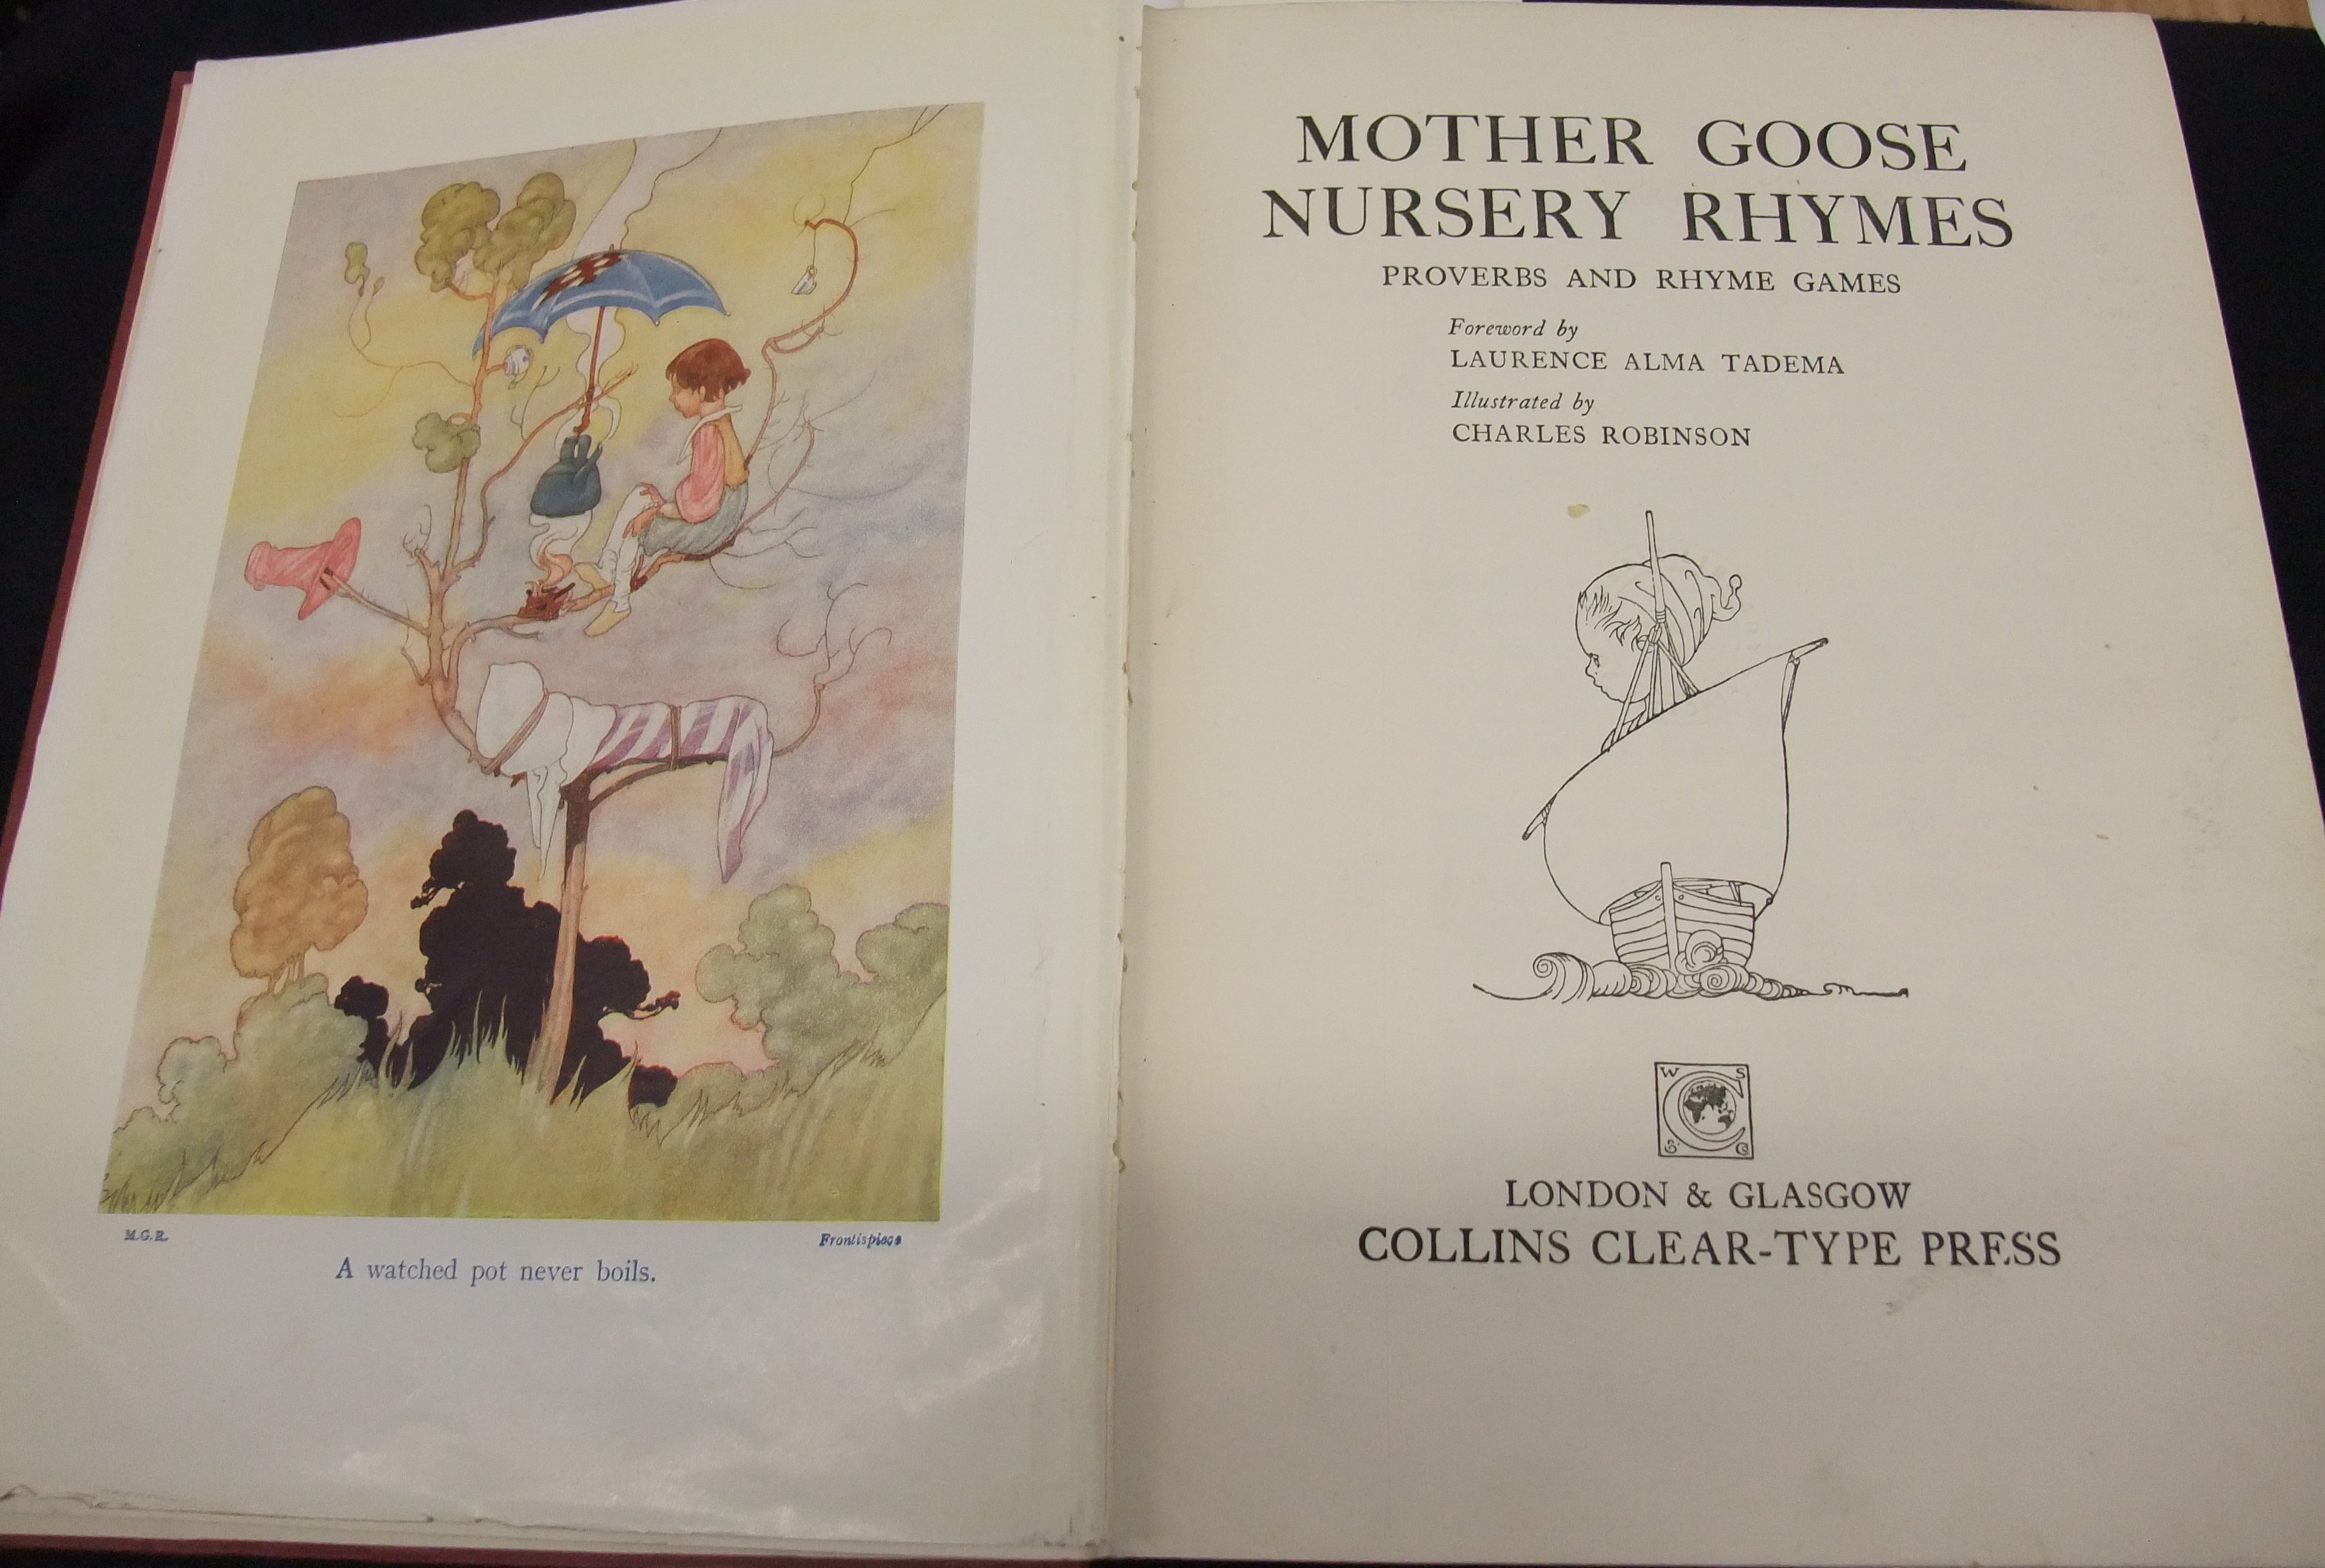 book open on title page of Mother Goose